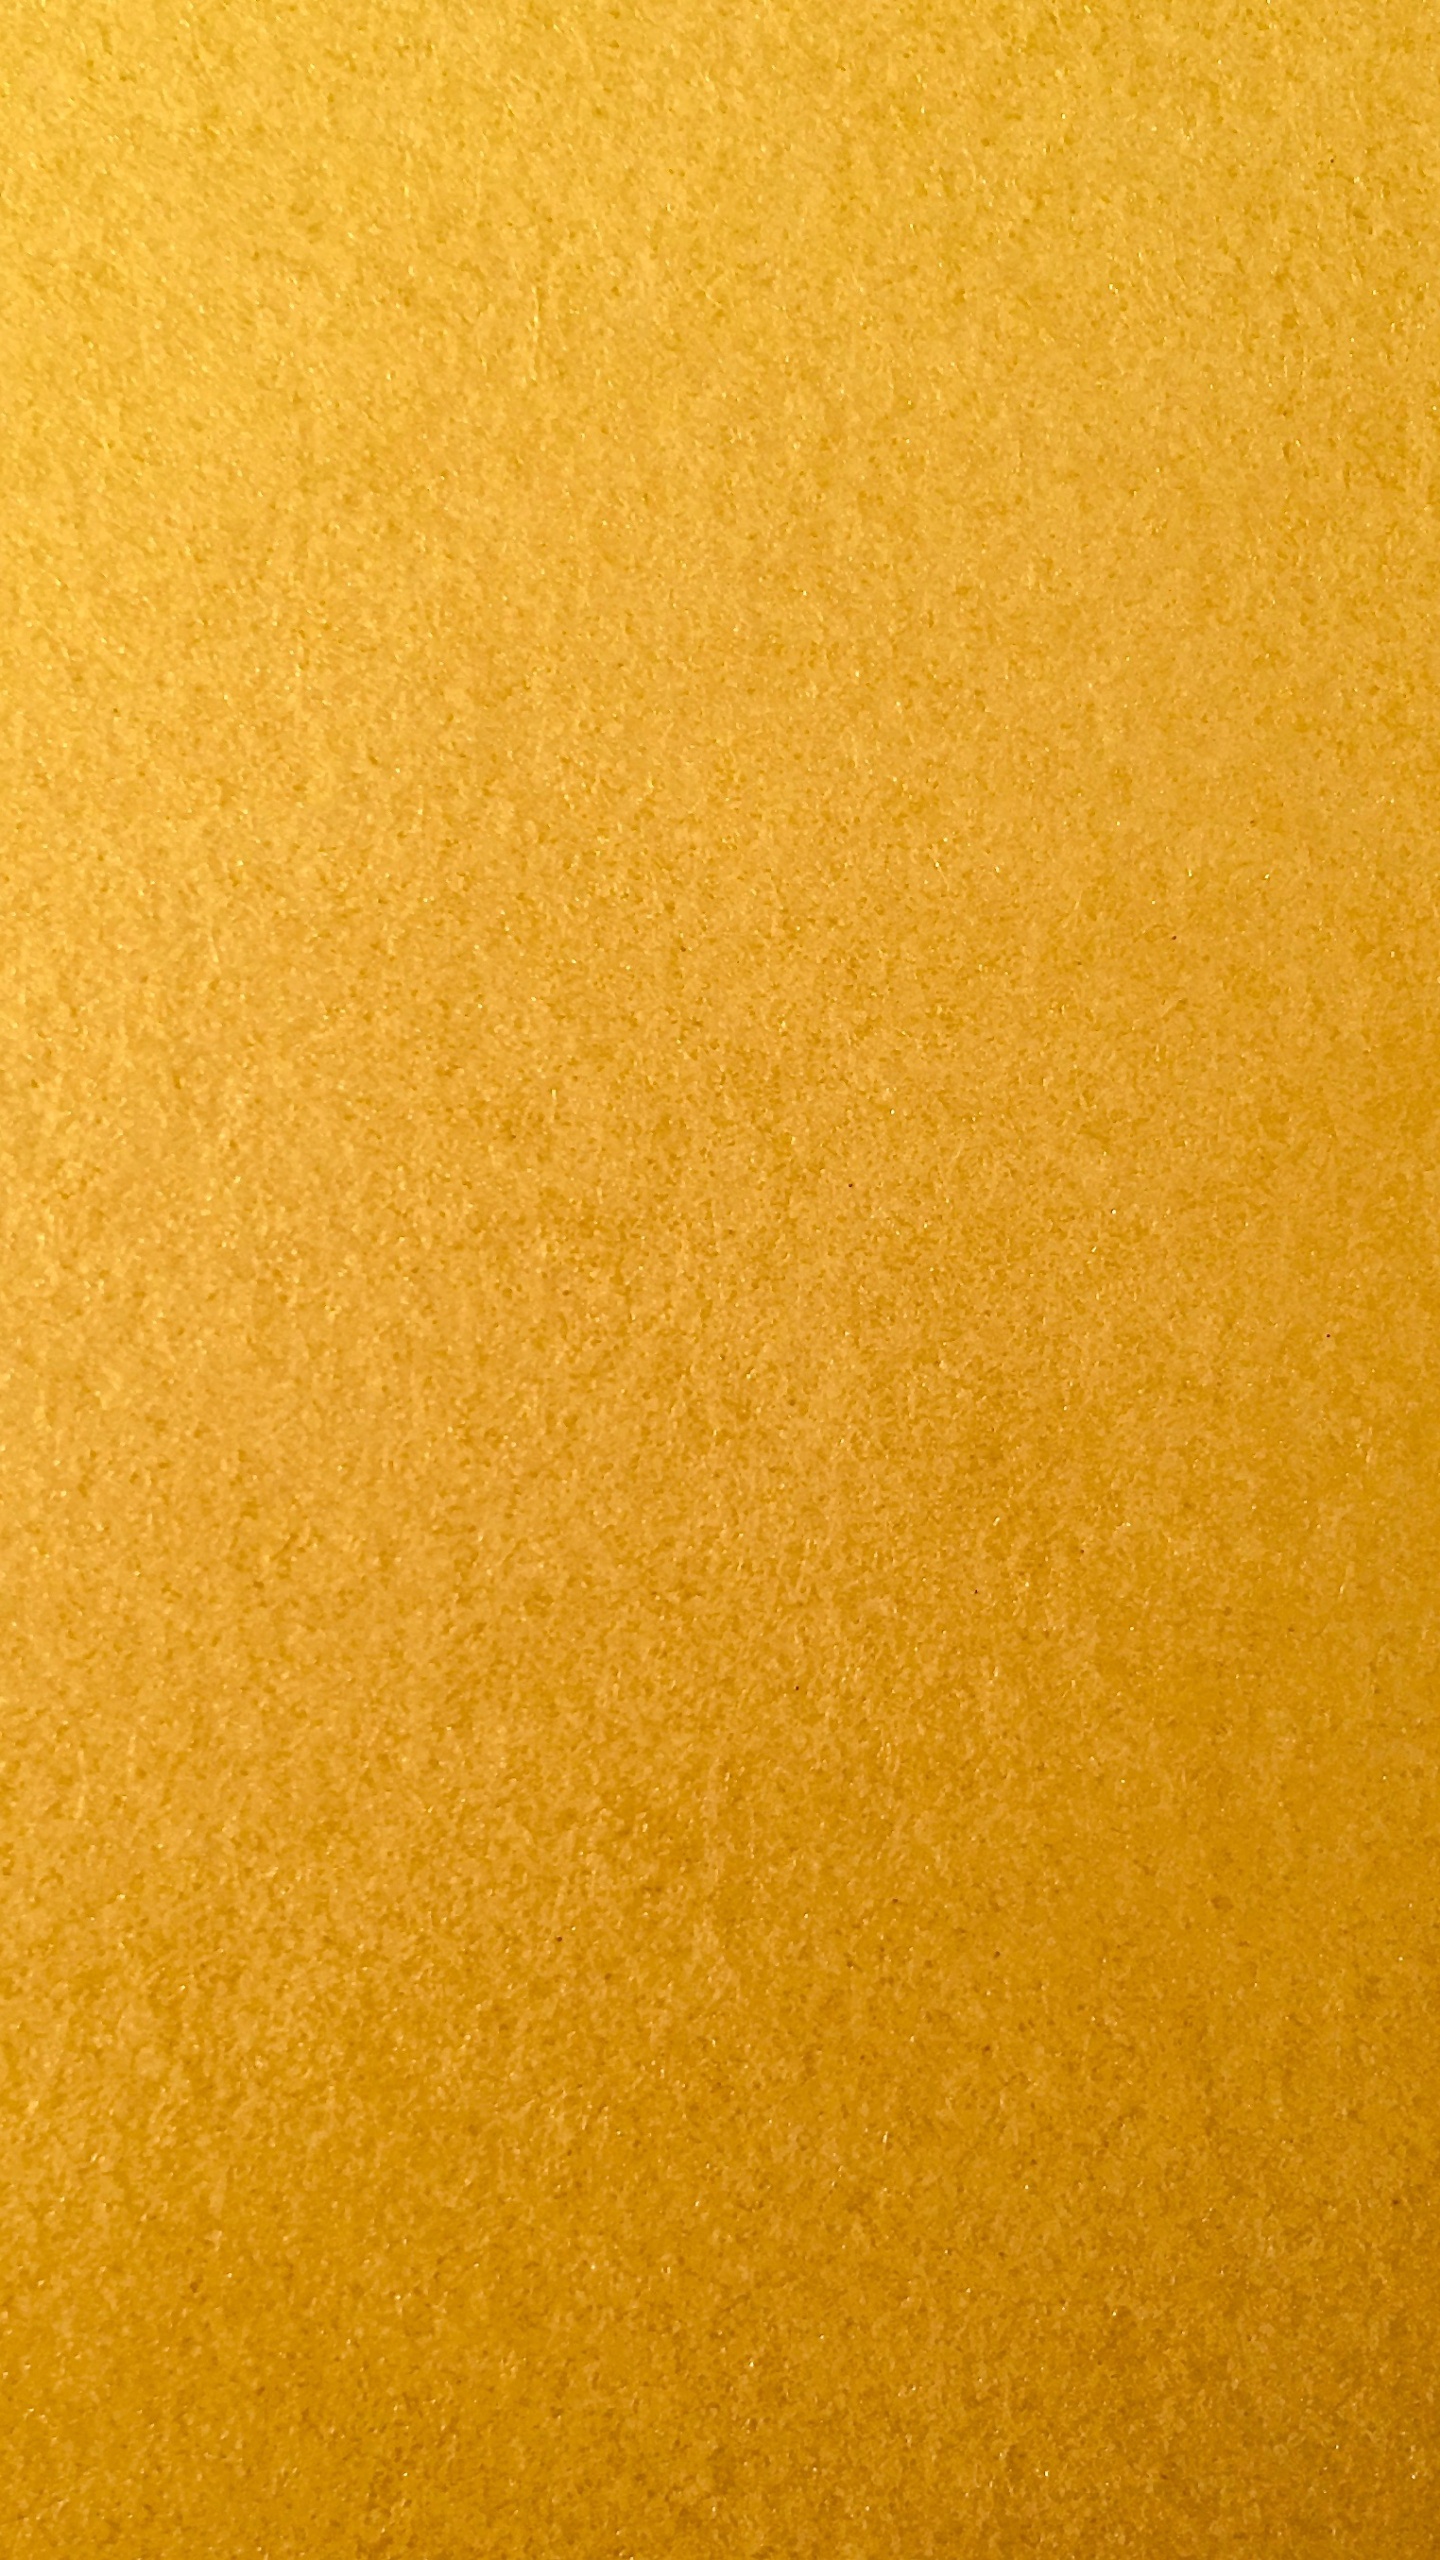 Yellow Textile in Close up Image. Wallpaper in 1440x2560 Resolution